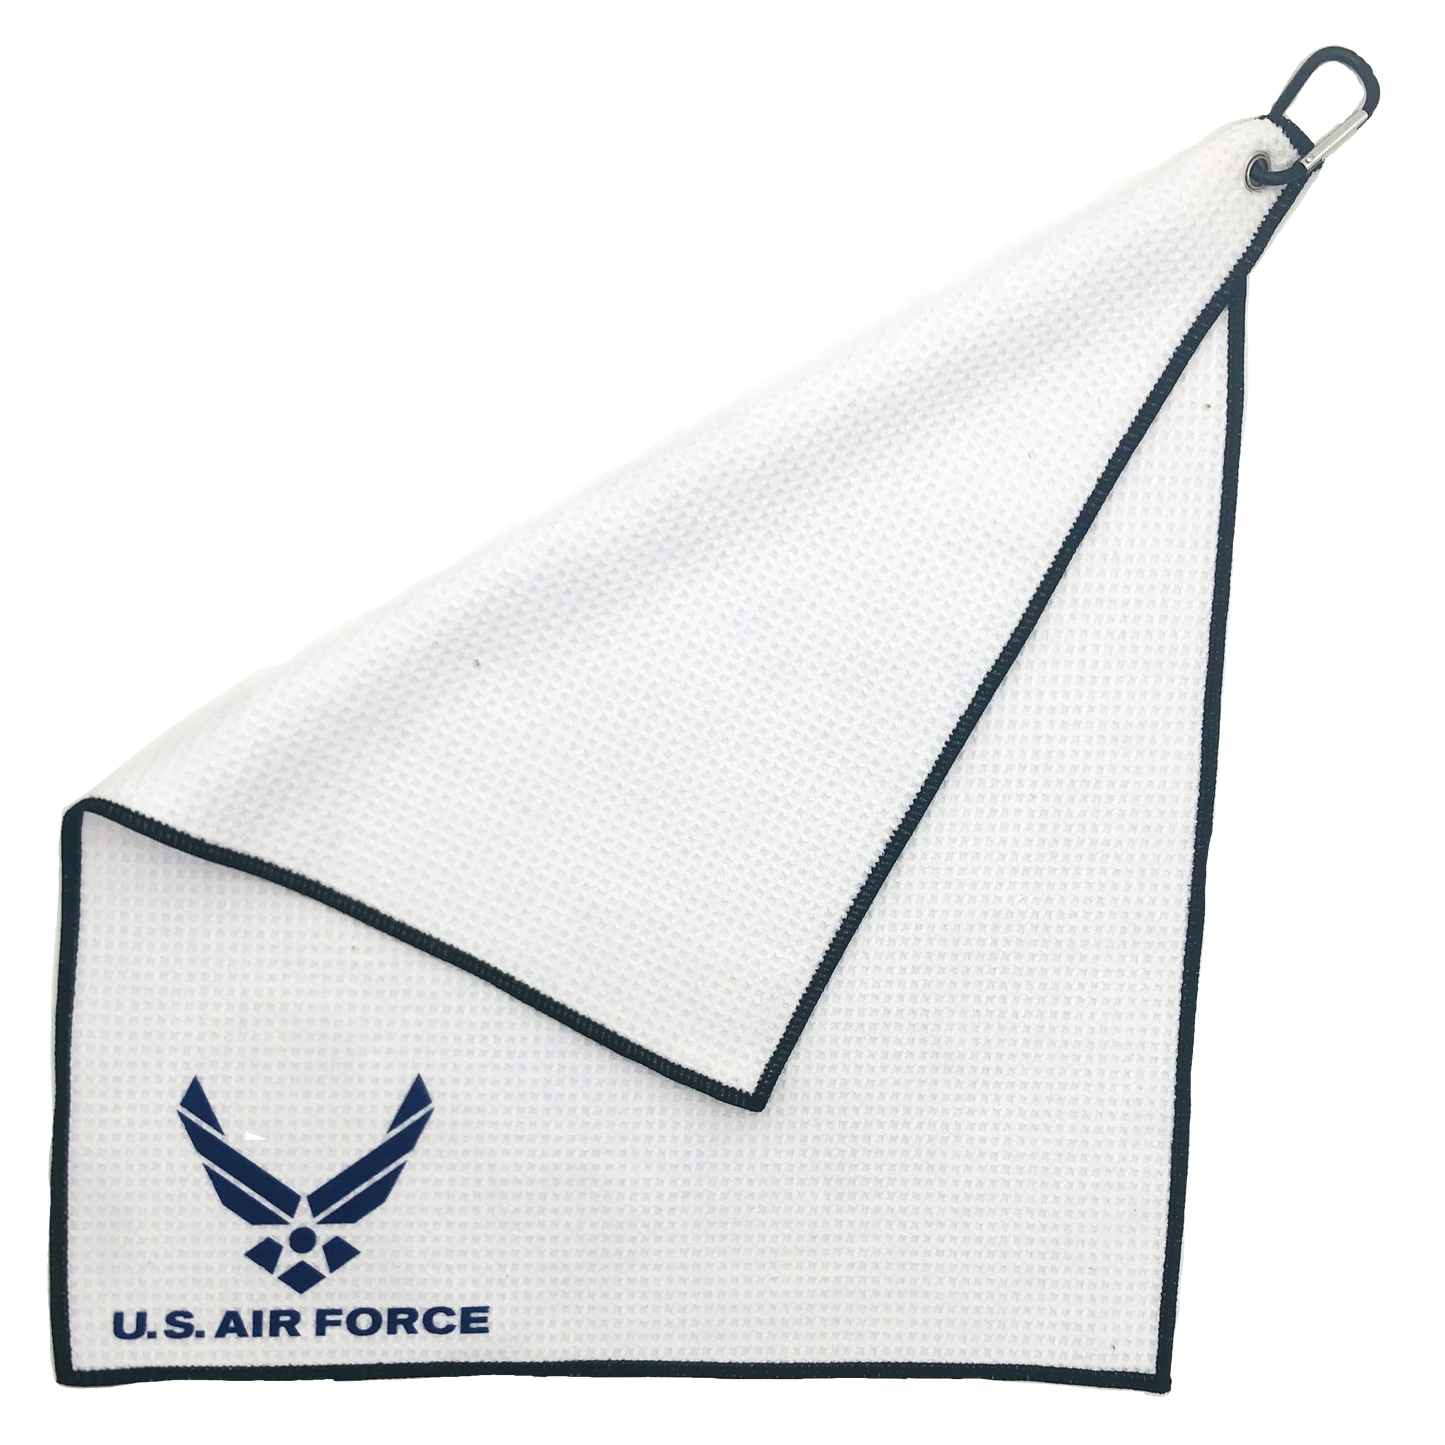 15" x 18" towel with Military Logos